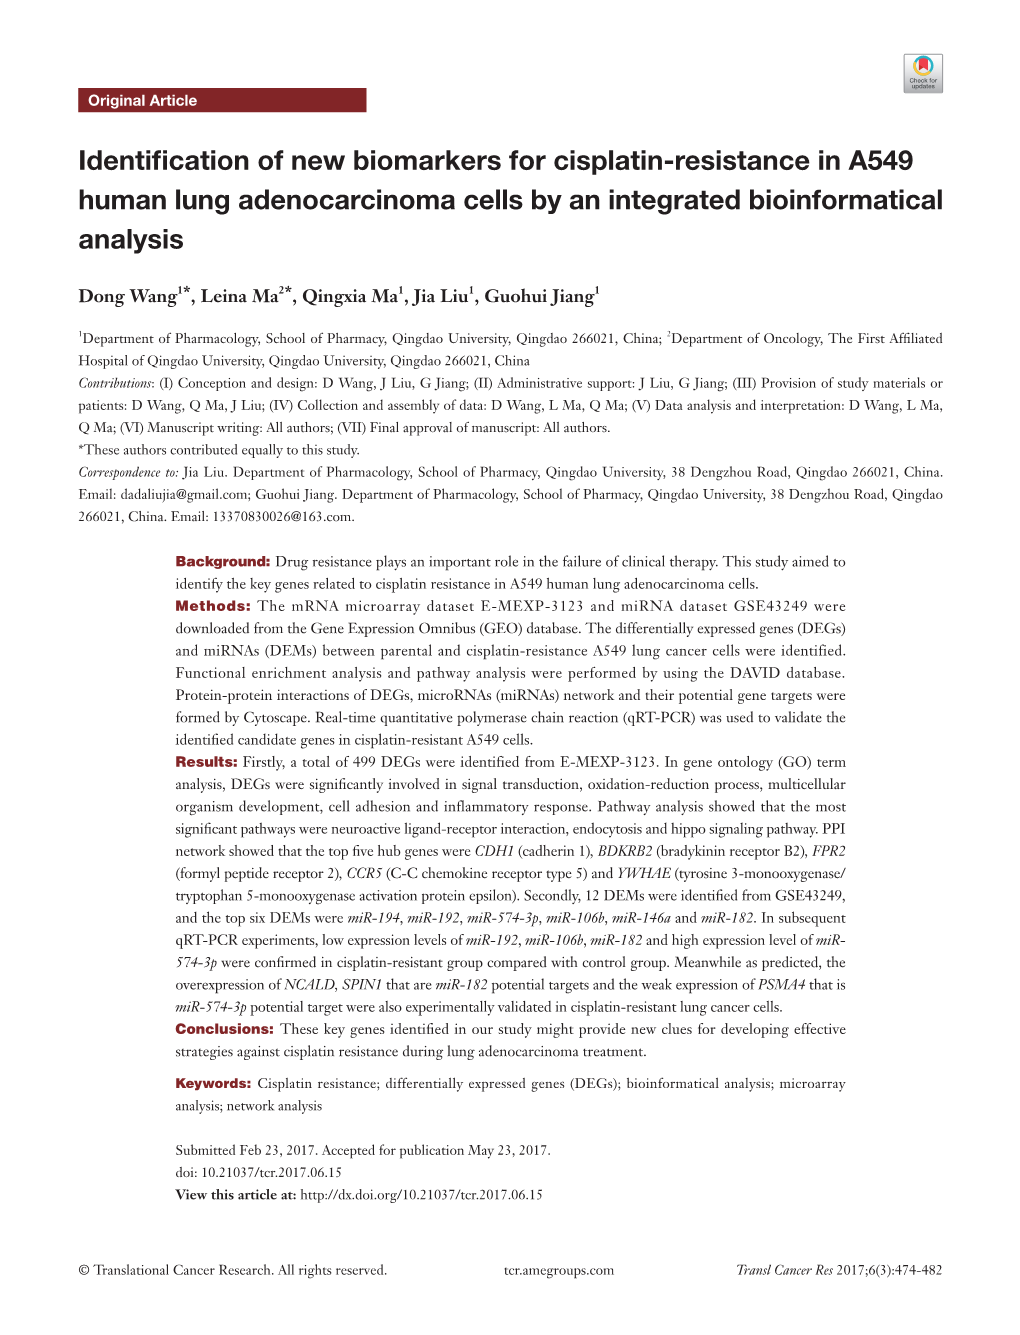 Identification of New Biomarkers for Cisplatin-Resistance in A549 Human Lung Adenocarcinoma Cells by an Integrated Bioinformatical Analysis